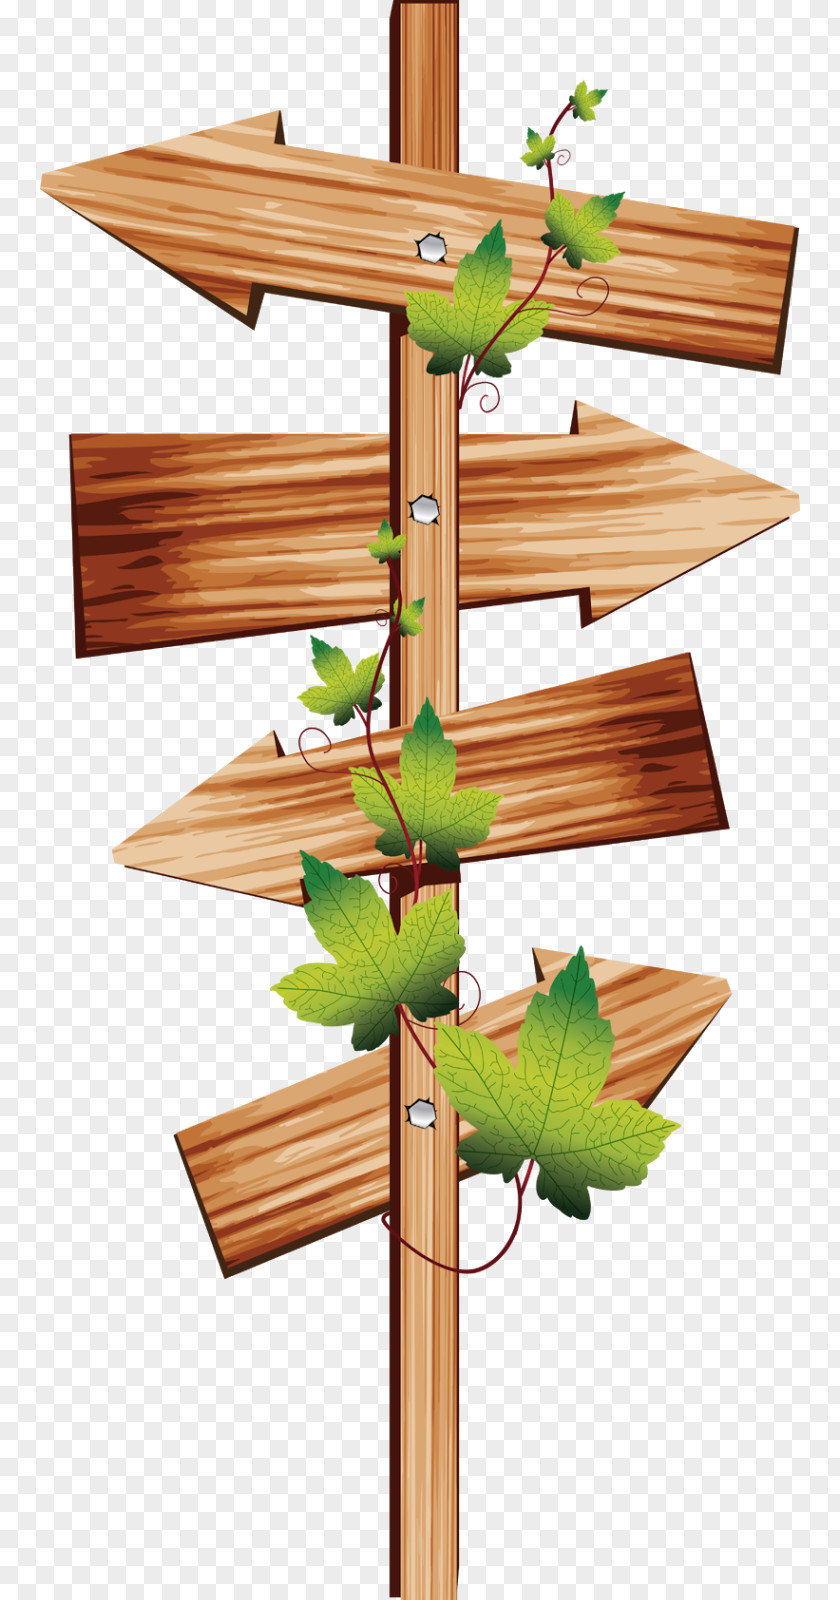 Arrow Sign Wooden Vector Graphics Adobe Photoshop Illustration Image PNG